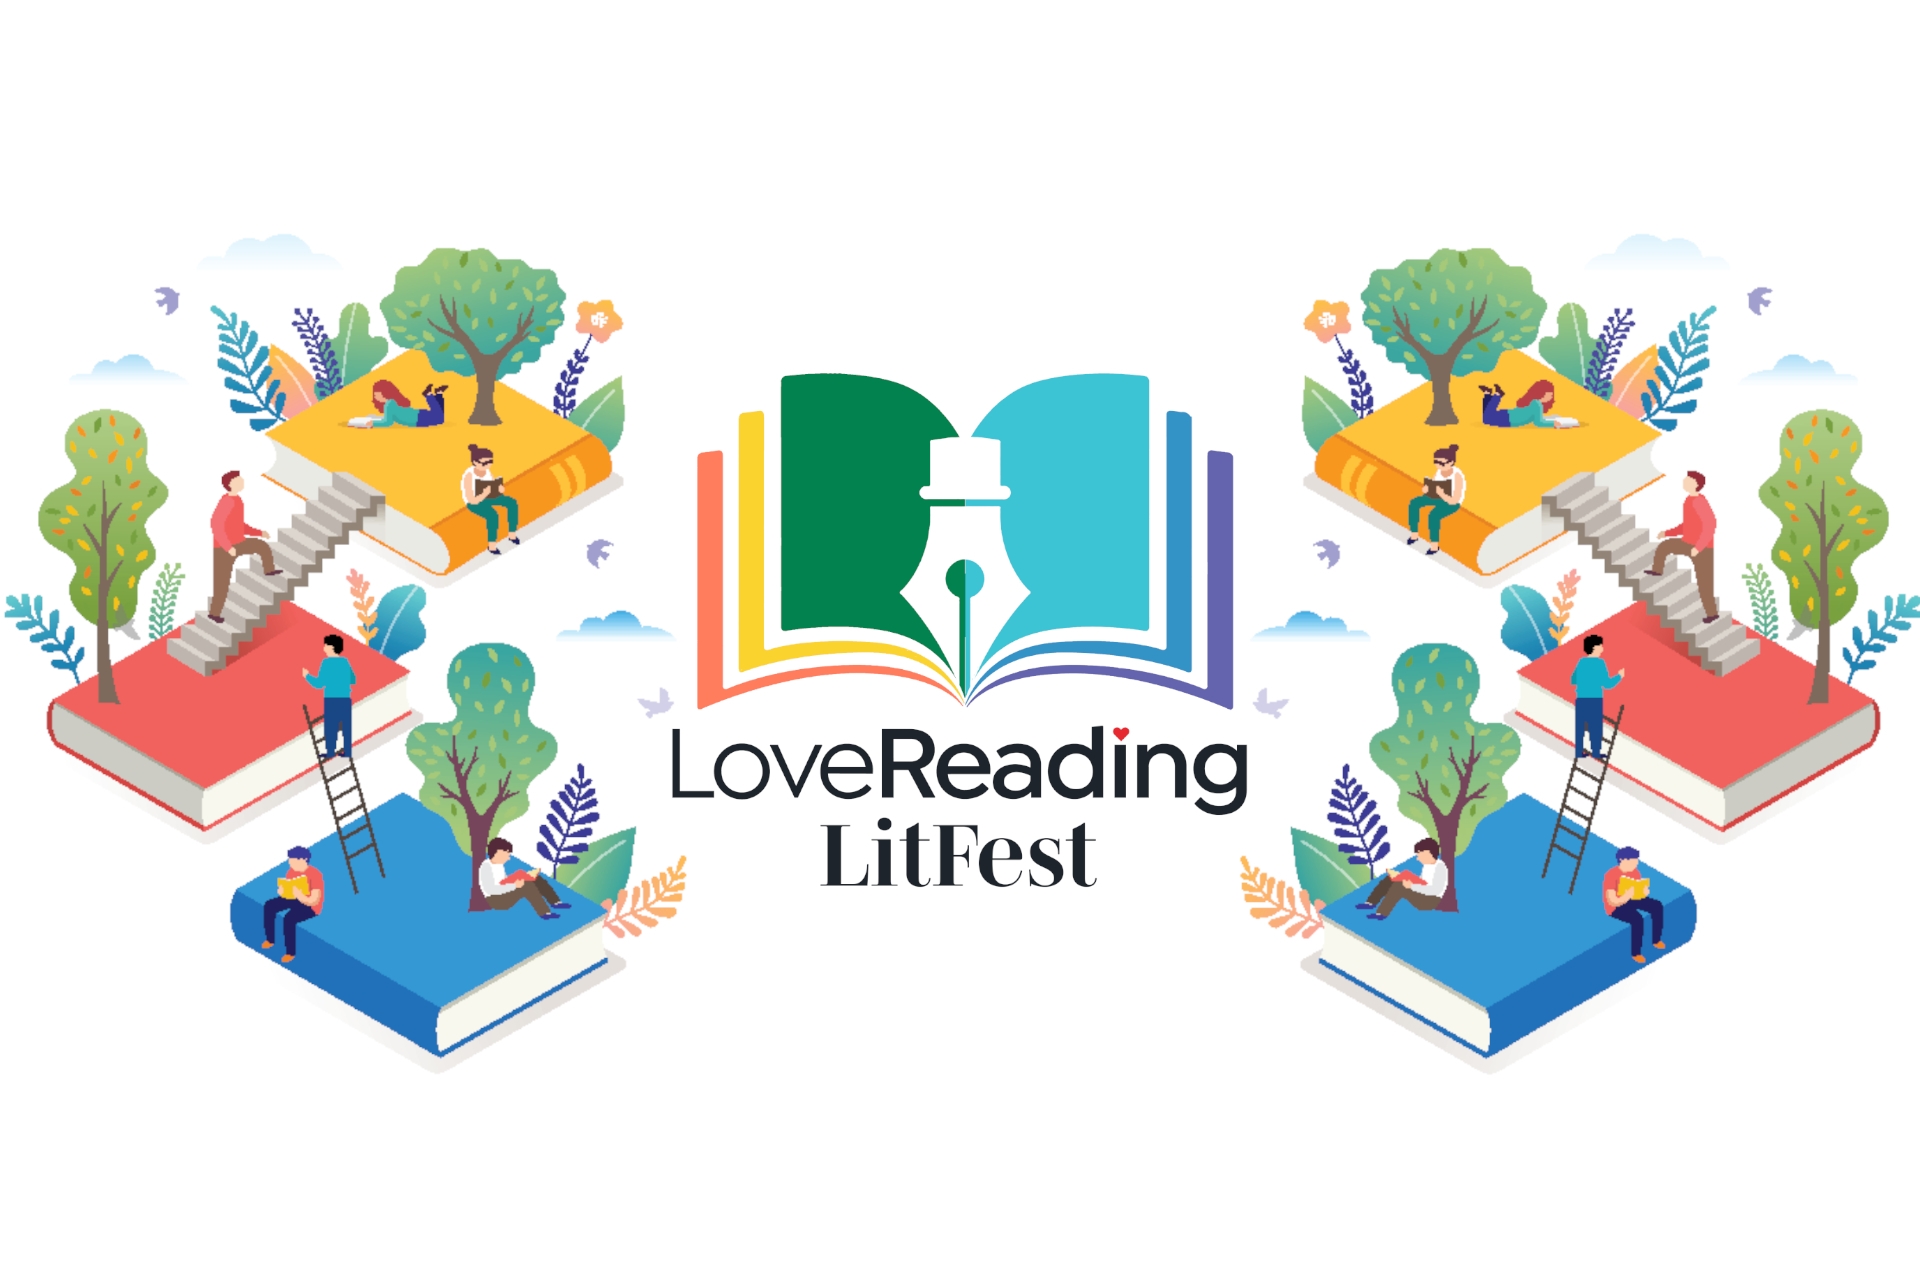 LoveReading LitFest - bringing authors & illustrators to your classrooms